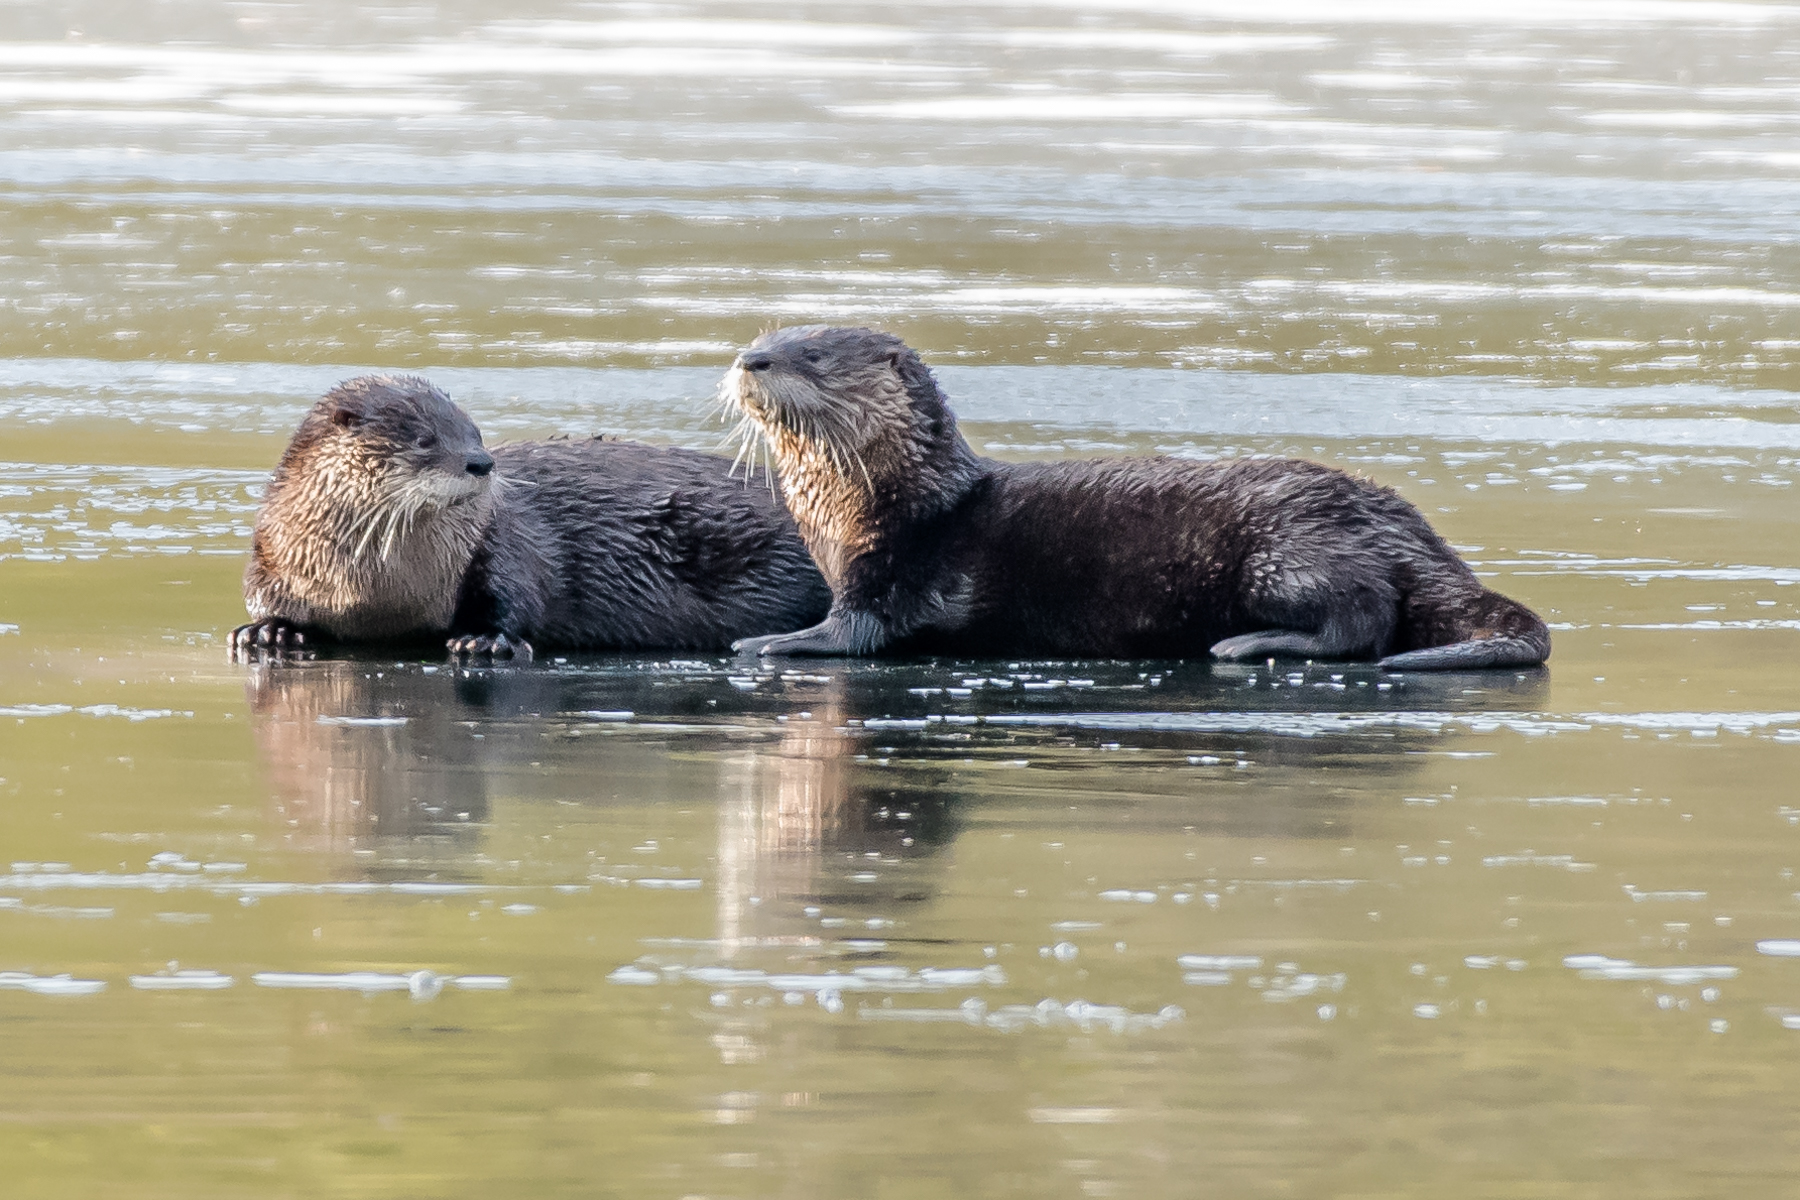   A close look at the faces of the river otters, &nbsp;cute huh? &nbsp;  